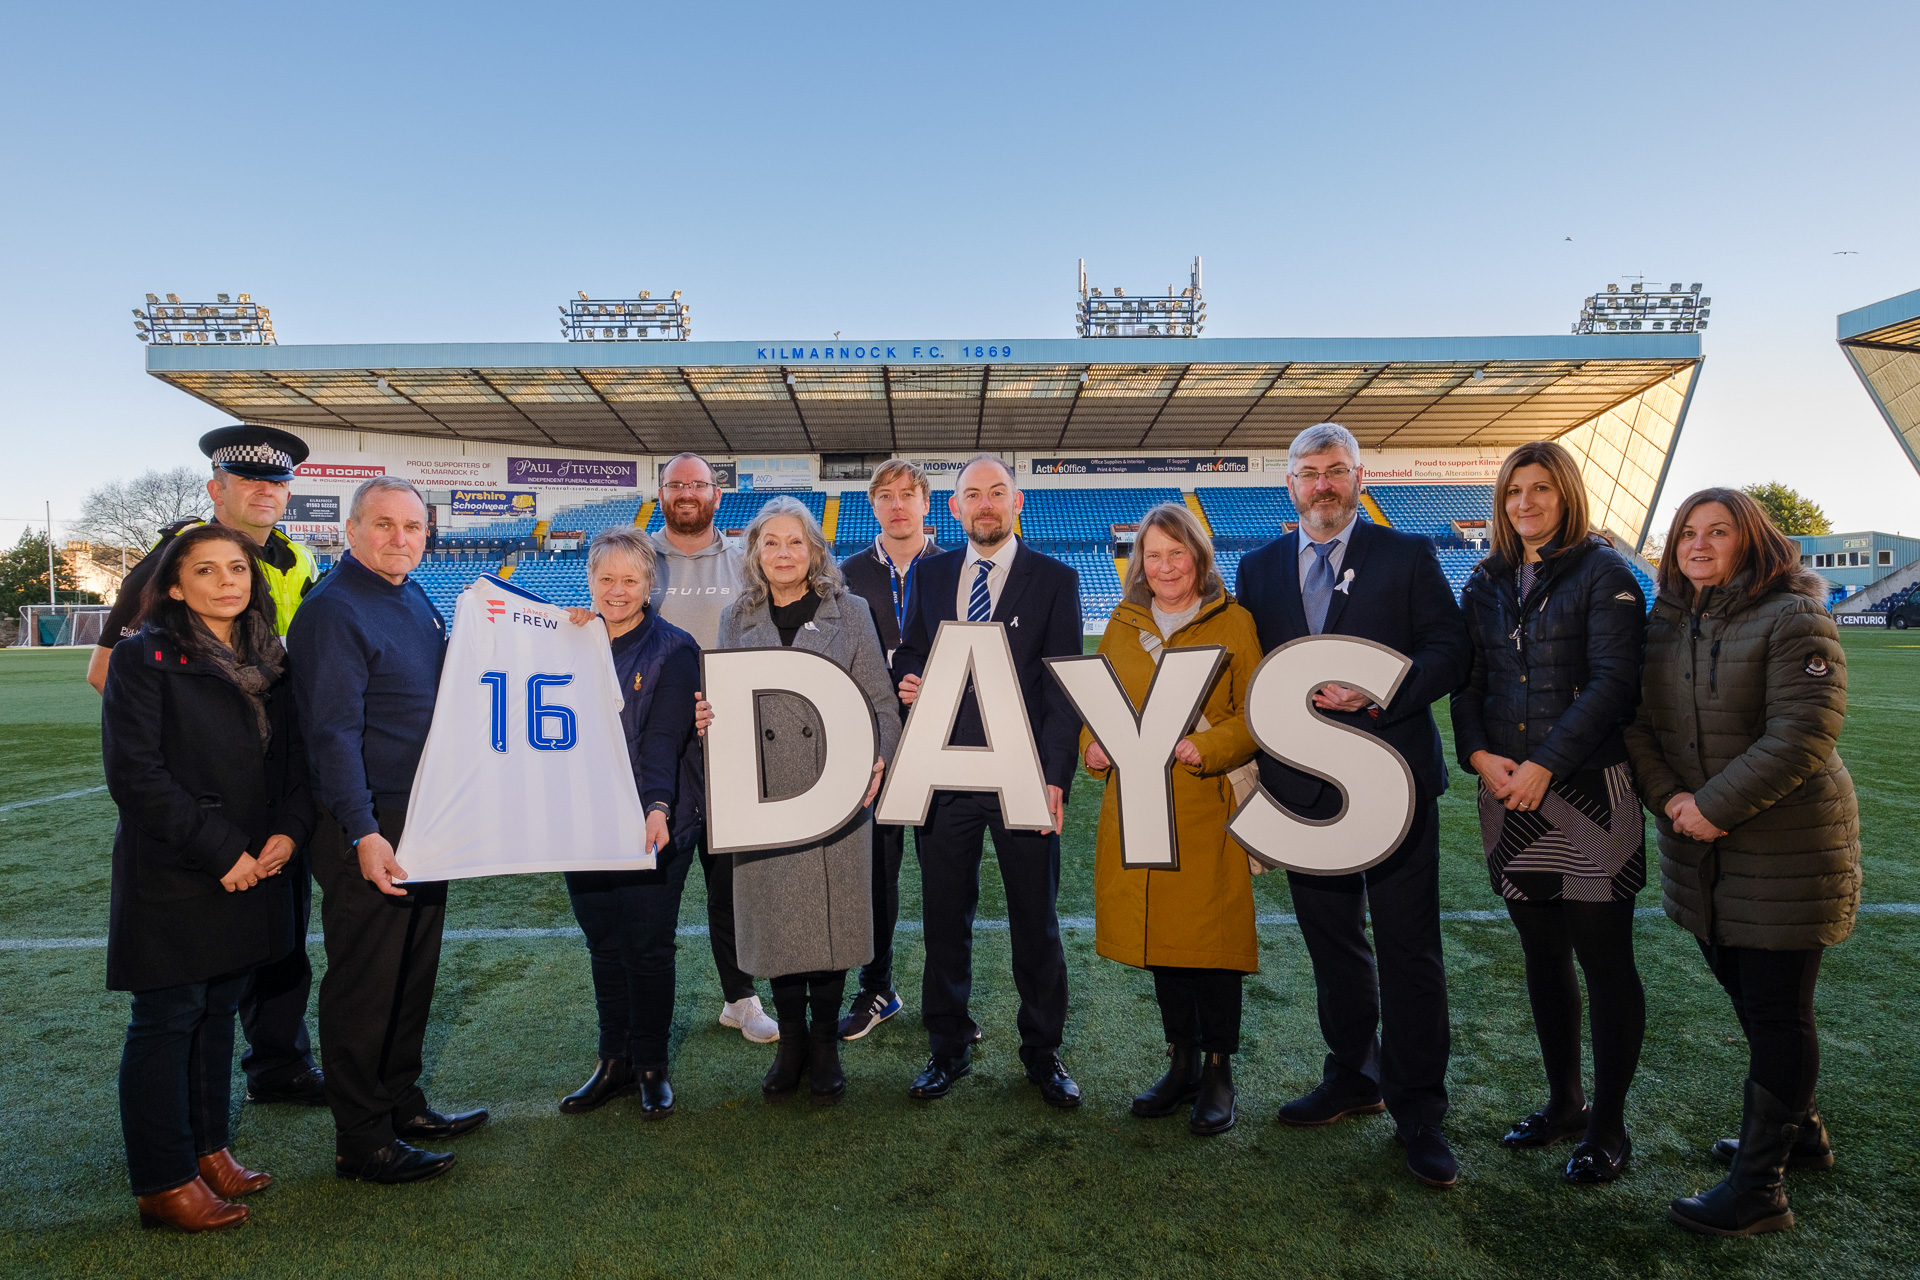 Supporters of 16 Days of Action campaign at Rugby Park.